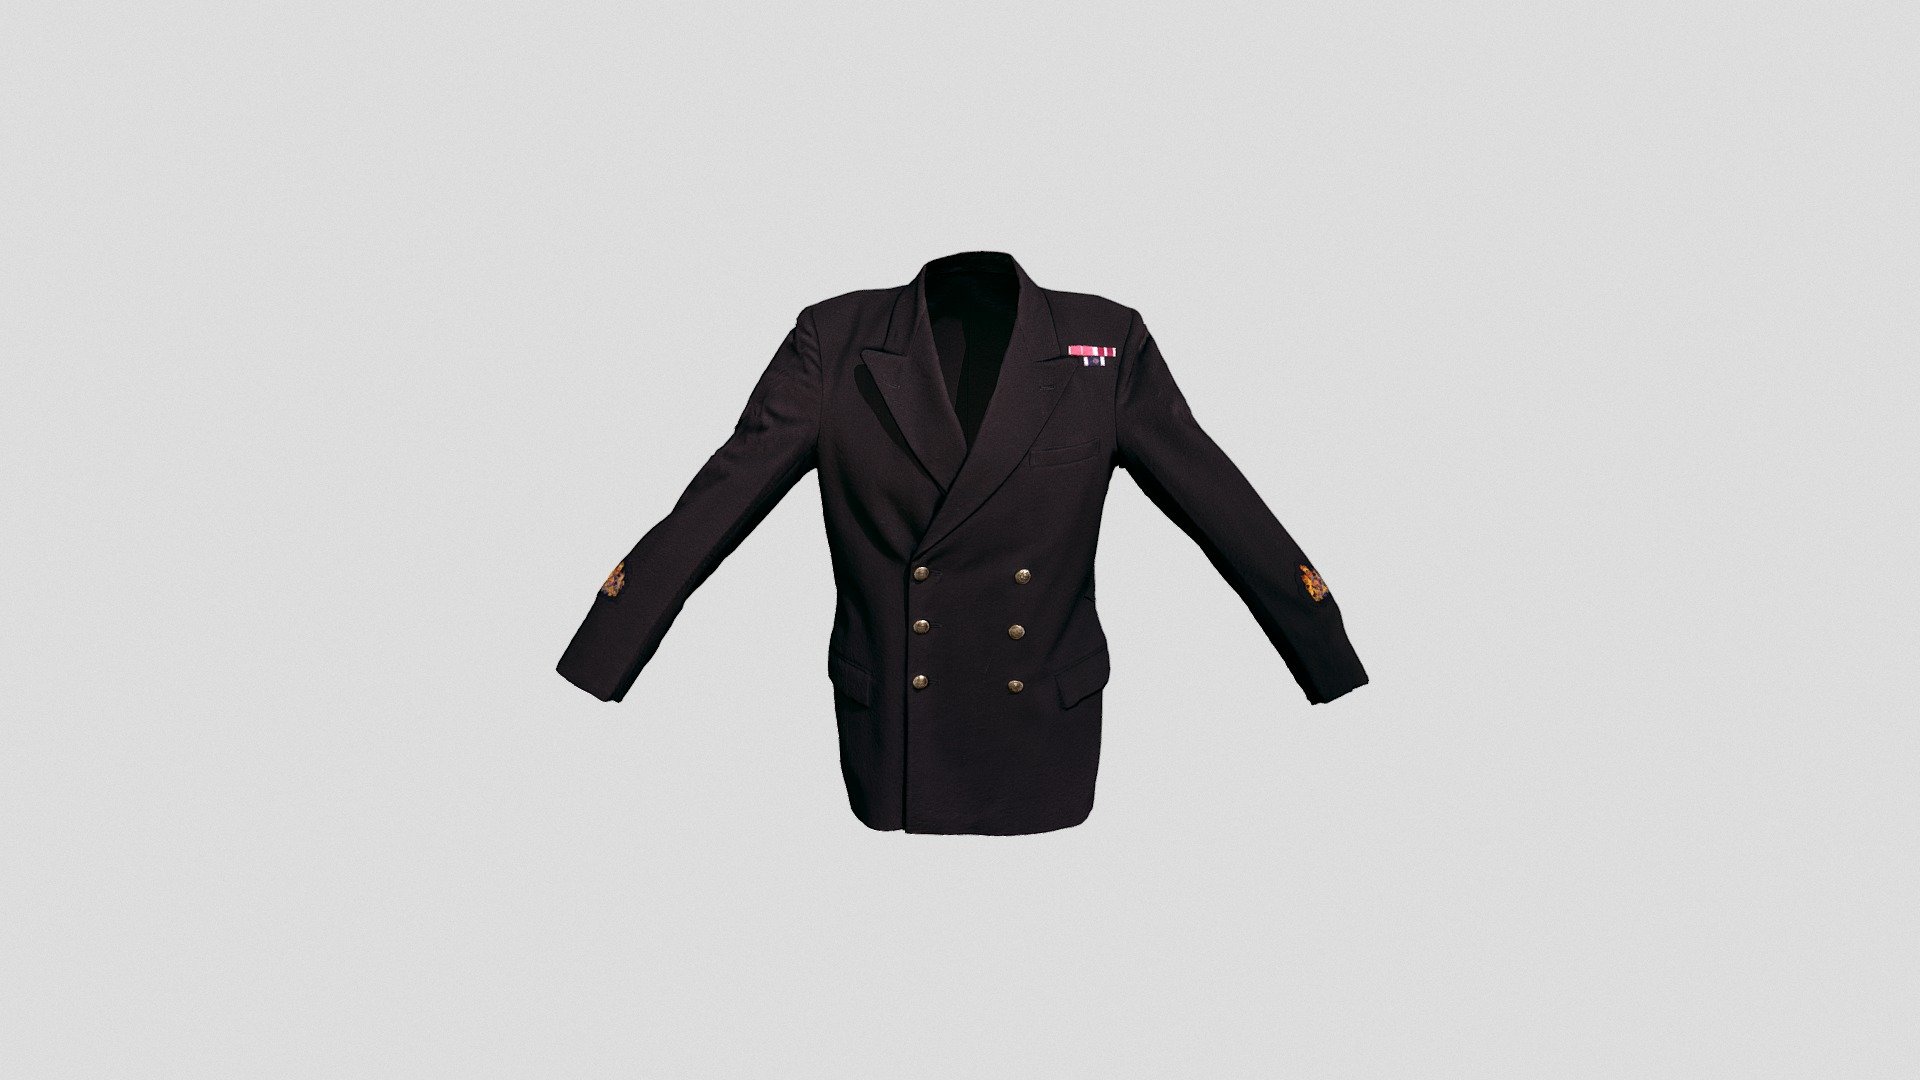 Short form description: A black naval uniform great coat with a variety of different cap markings/rankings. 
Long form description: A black naval uniform jacket with a variety of different badges and rank markings over the shoulders and arms. There are 6 buttons down the front of the coat, with 3 buttons either side with accompanying button holes, suggesting that it was actually unisex. The material used is a black cotton with the garment then being lined with silk. On the cuff of either sleeve there is a British army cap suggesting that the ranking of the person who originally owned and wore the garment. There is a naval stripe on the left shoulder where potentially medals would have hung or further indication of where the gentleman ranked on terms of the navy. There is a small split up the back of the garment, there to assist with movements such as getting in or out of vehicles or climbing on and off a horse. 
Model made by Purpose 3D - Naval Uniform Jacket - 3D model by musecornishlife 3d model